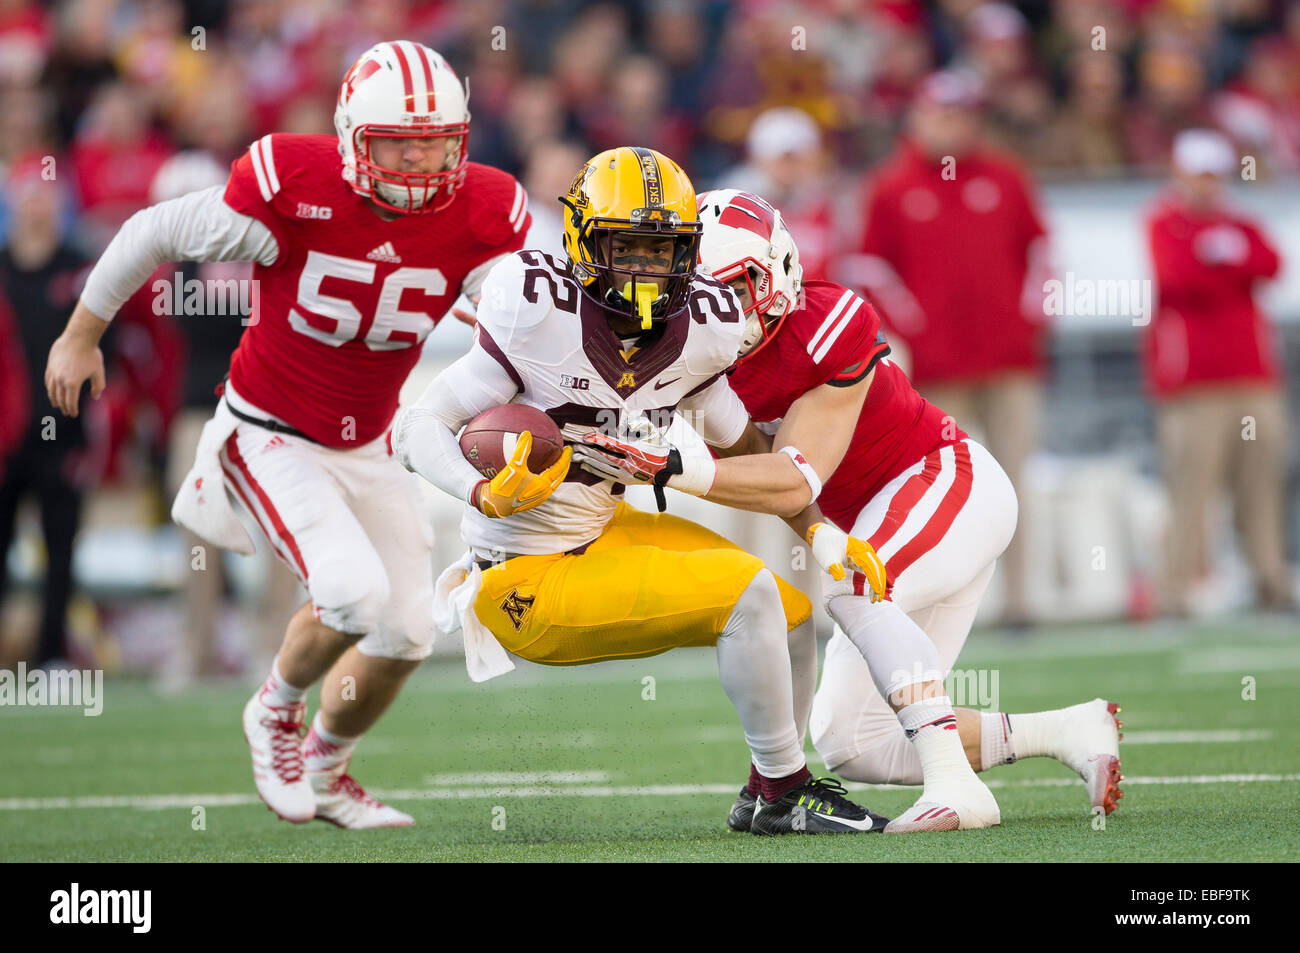 November 29, 2014: Minnesota Golden Gophers wide receiver Jeff Borchardt #22 is tackled by two Badgers during the NCAA Football game between the Minnesota Golden Gophers and the Wisconsin Badgers at Camp Randall Stadium in Madison, WI. Wisconsin defeated Minnesota 34-24. John Fisher/CSM Stock Photo